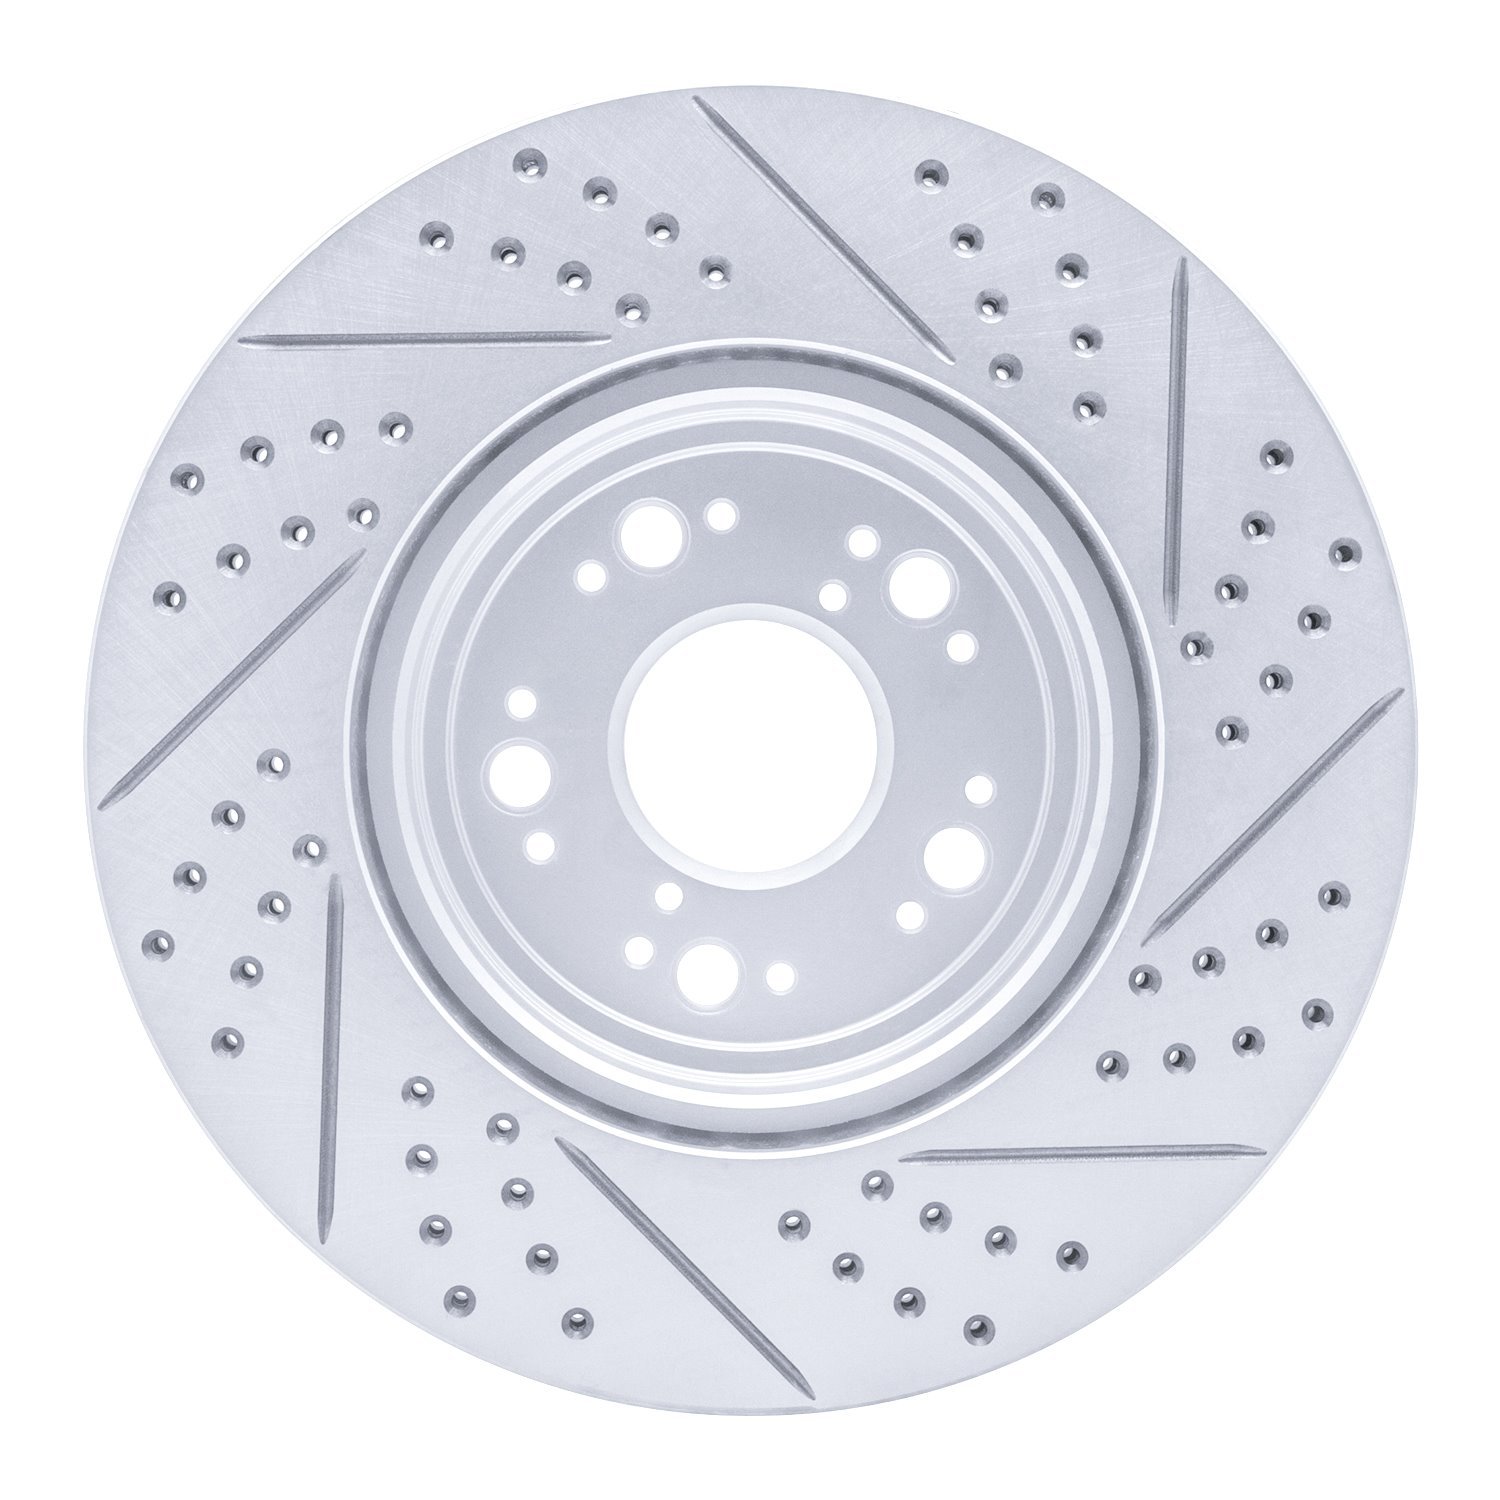 830-75008L Geoperformance Drilled/Slotted Brake Rotor, 1995-2000 Lexus/Toyota/Scion, Position: Front Left